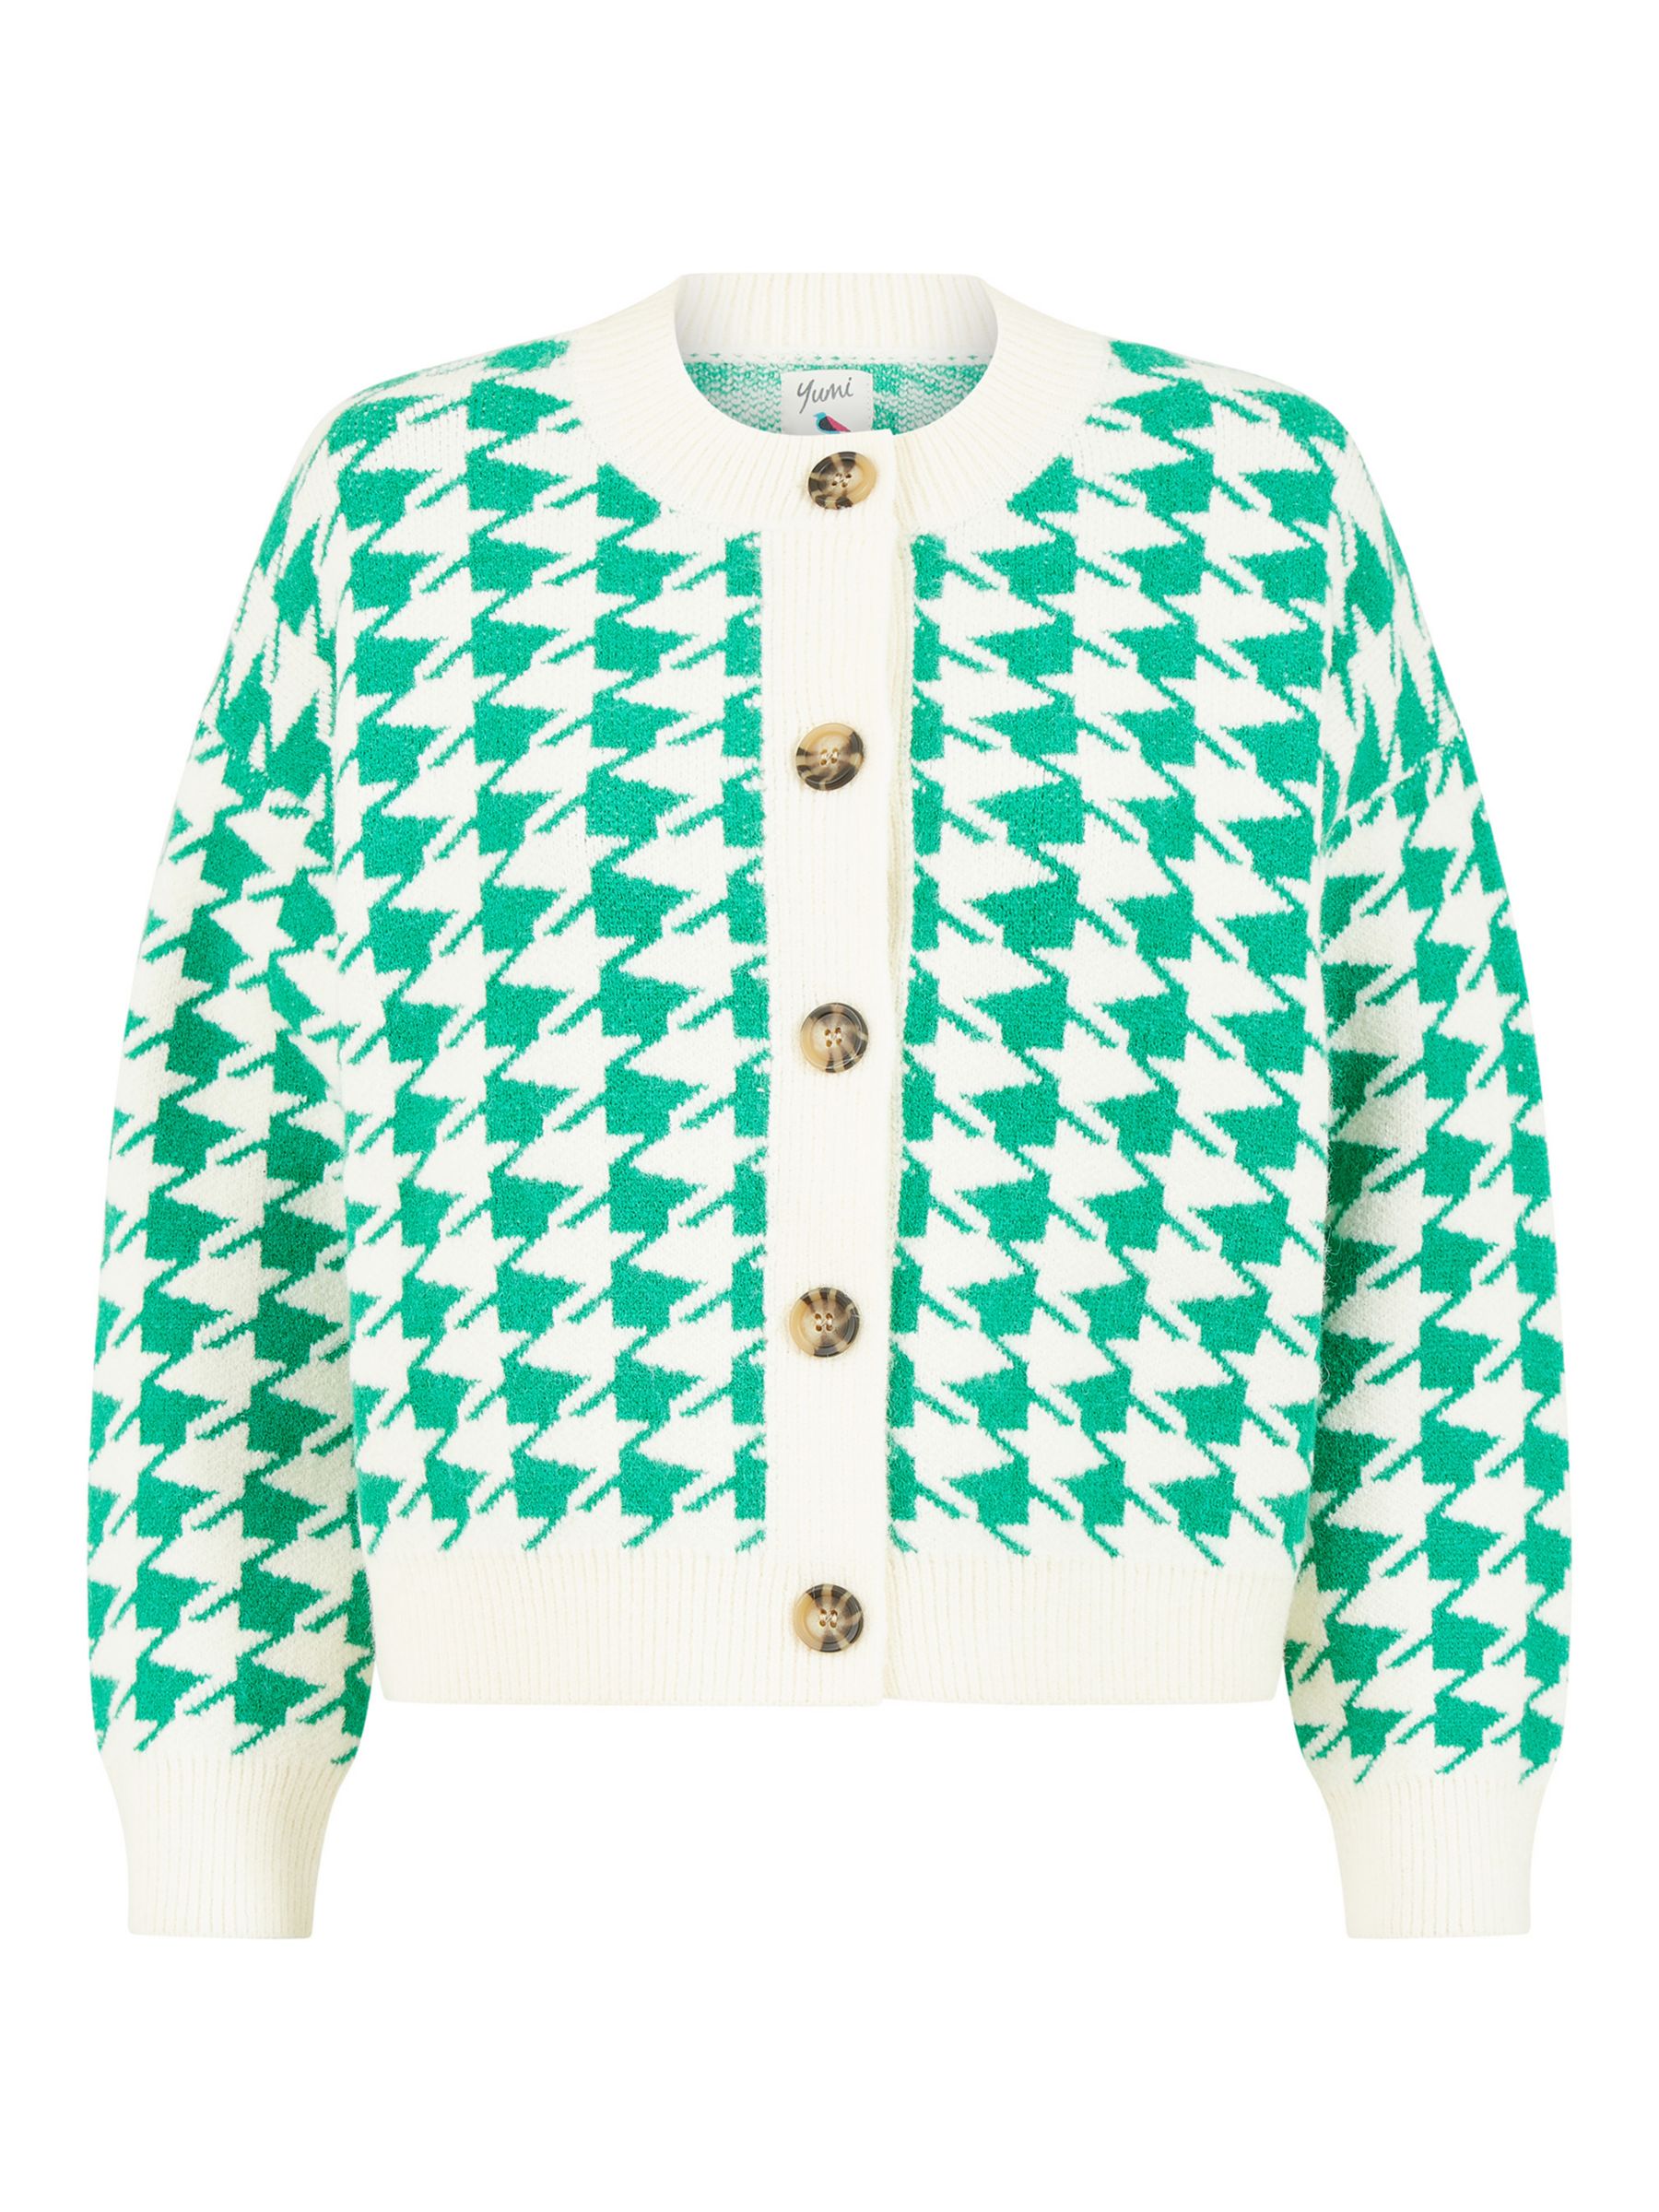 Buy Yumi Houndstooth Cardigan Online at johnlewis.com